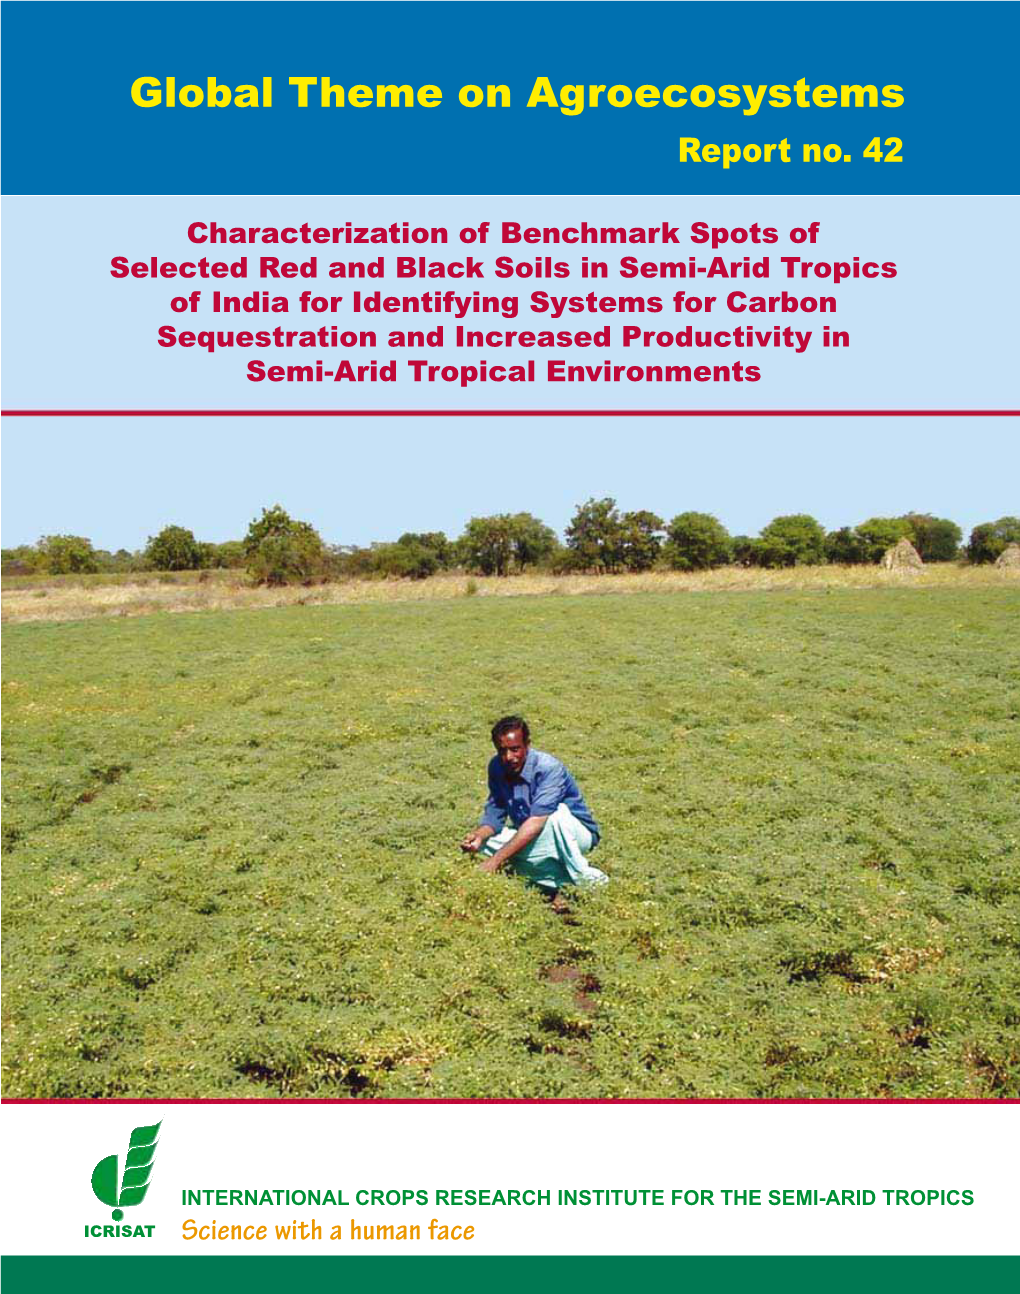 Global Theme on Agroecosystems Report No